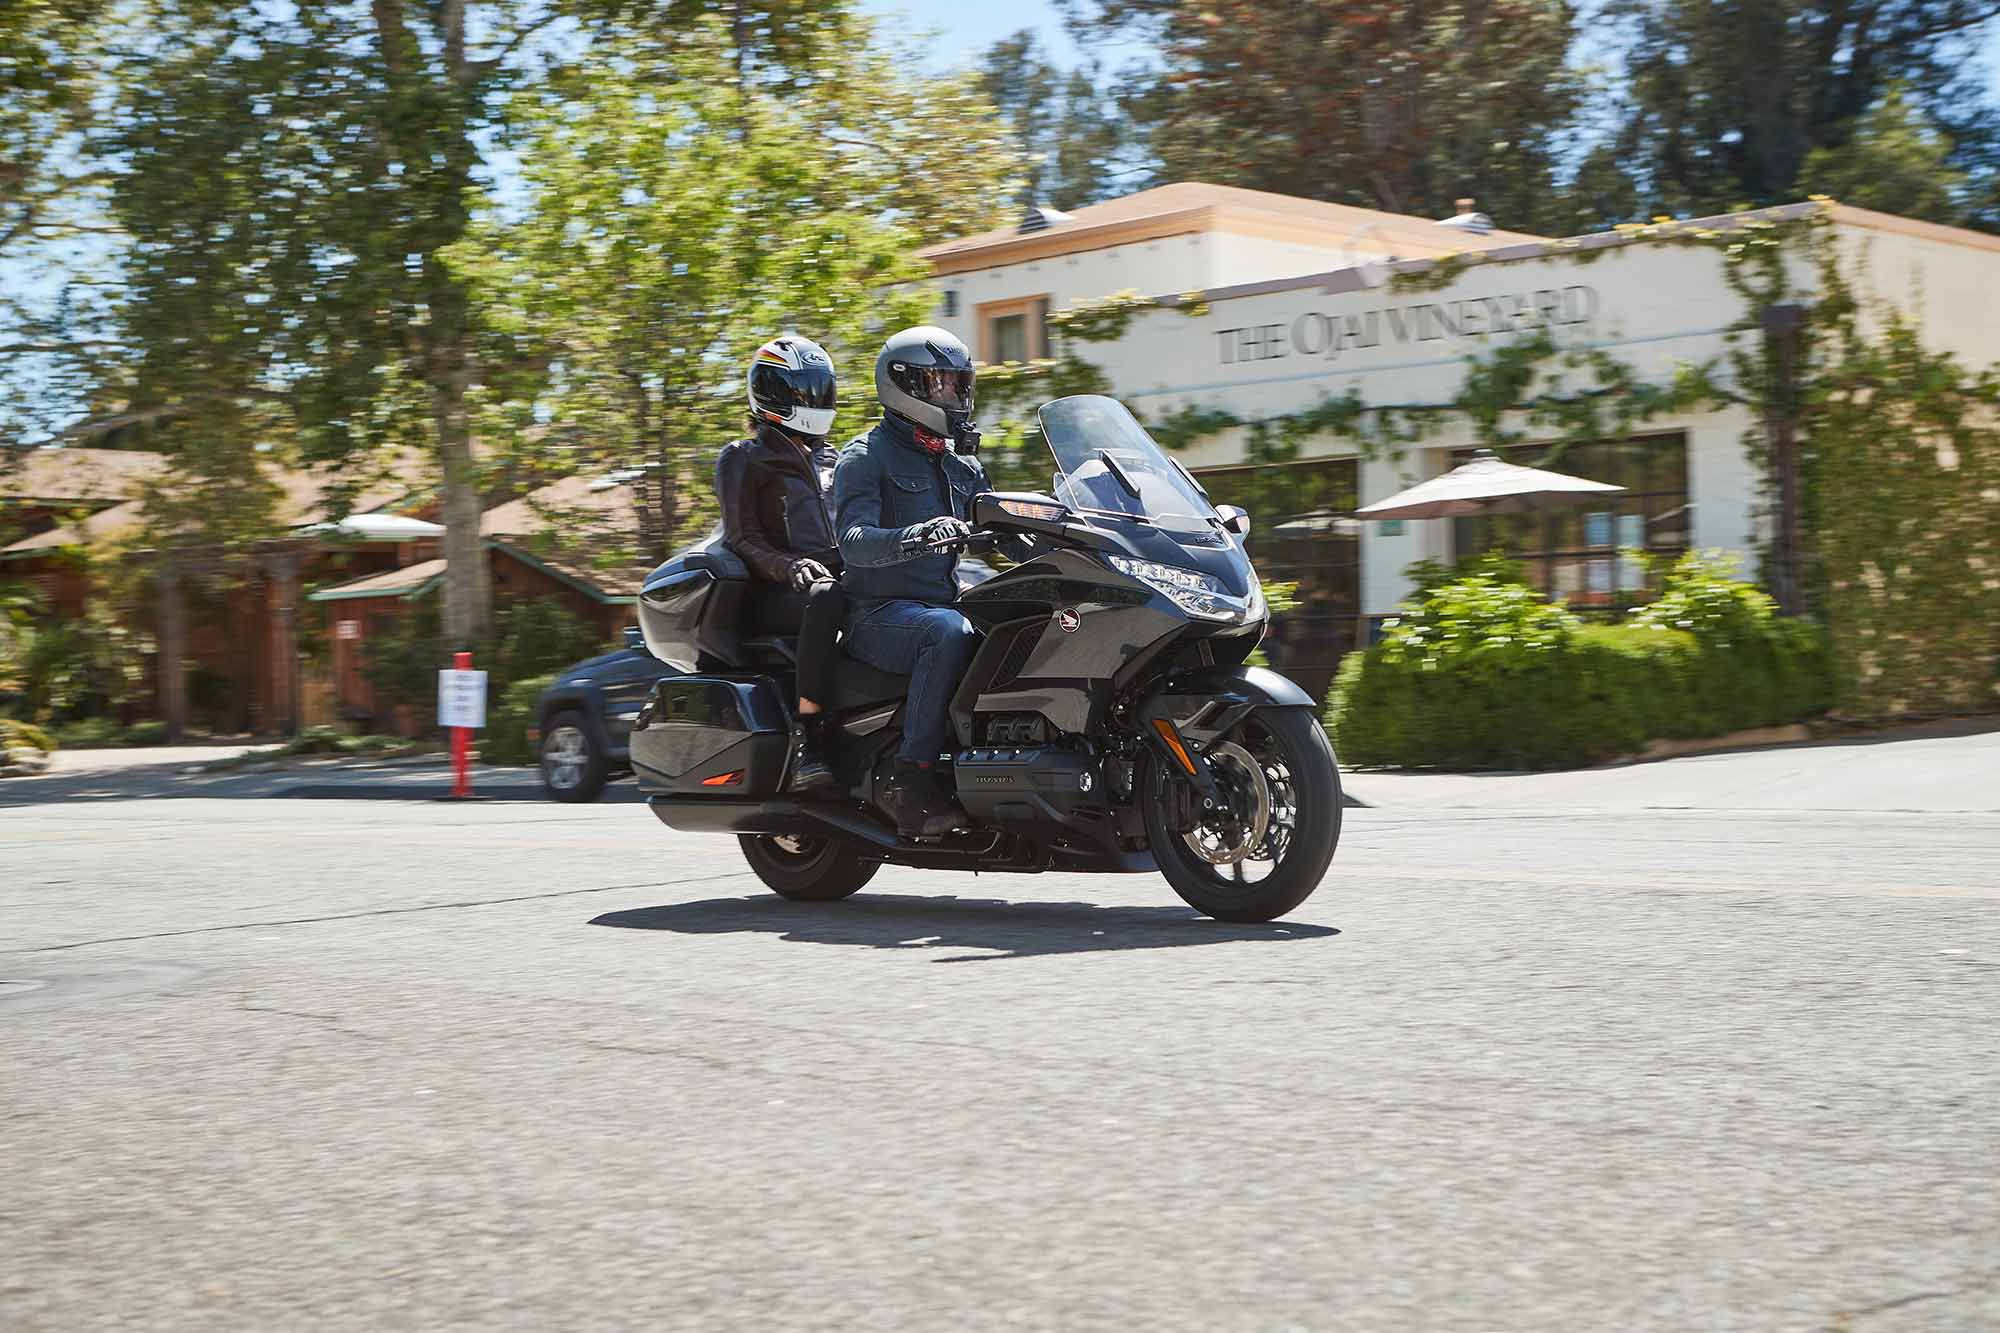 Honda’s Gold Wing Tour offers a regal ride like no other production motorcycle.